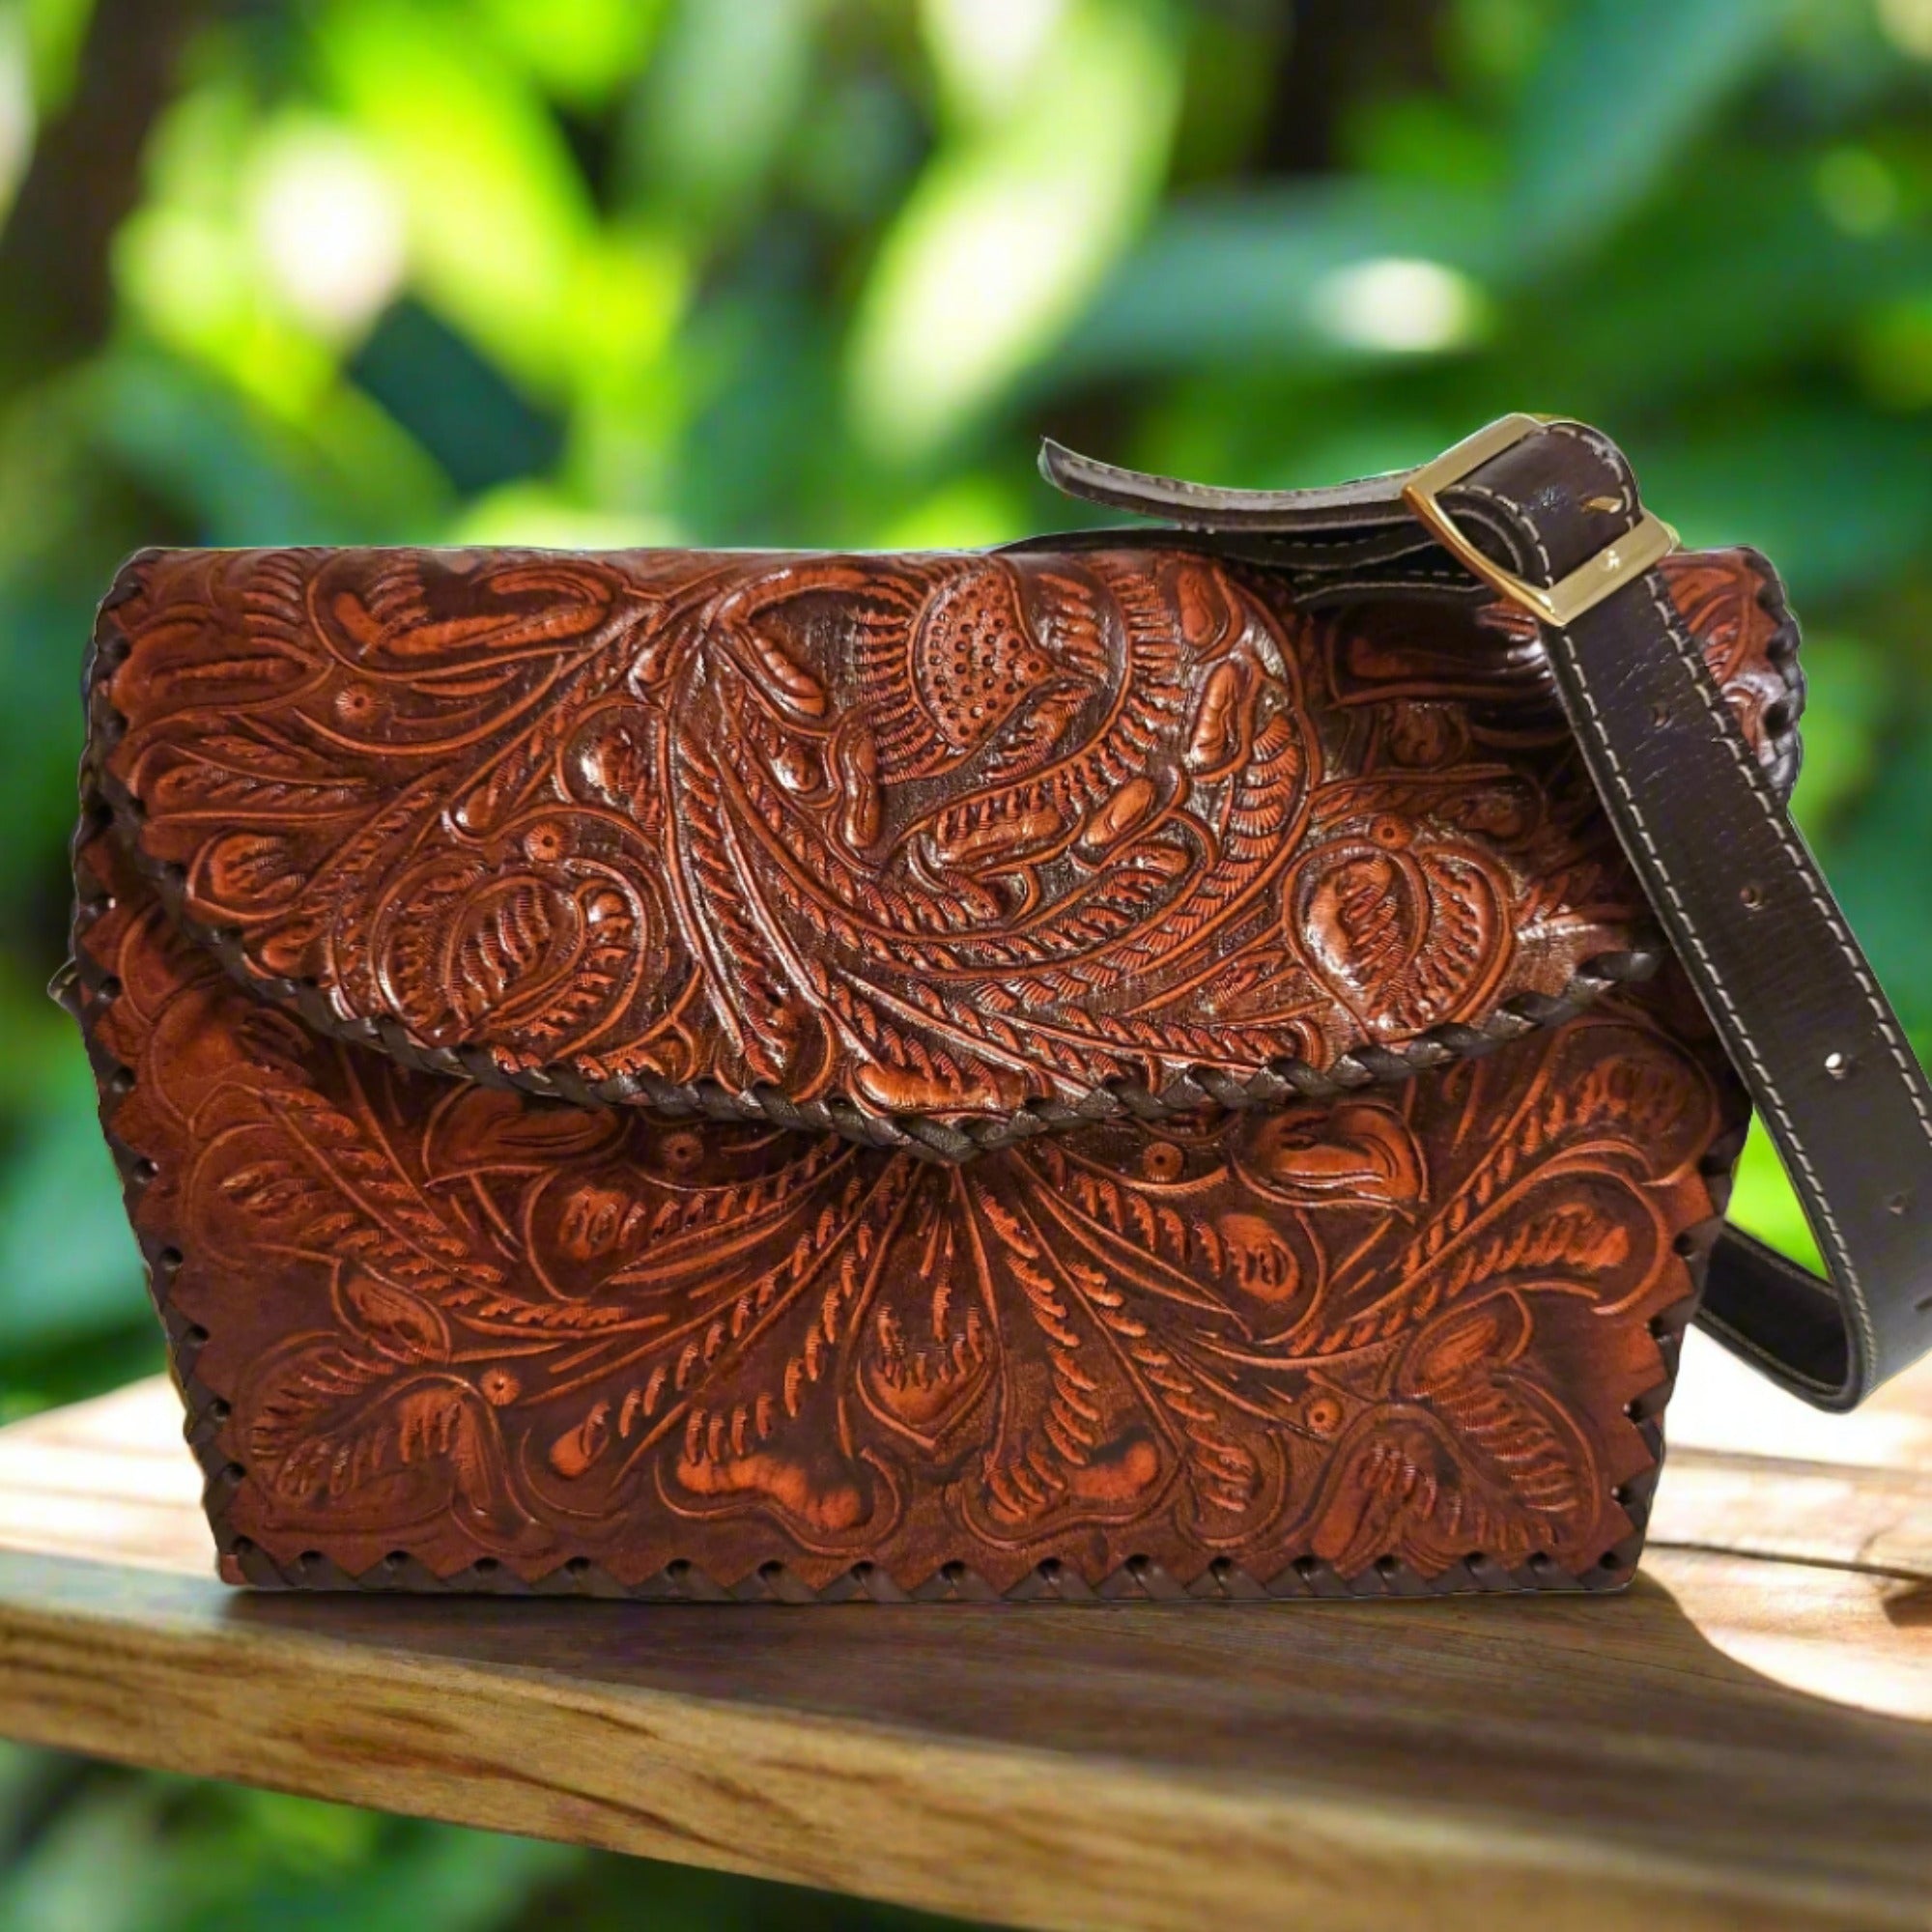 Small leather bag for women, hand tooled leather bag , handmade